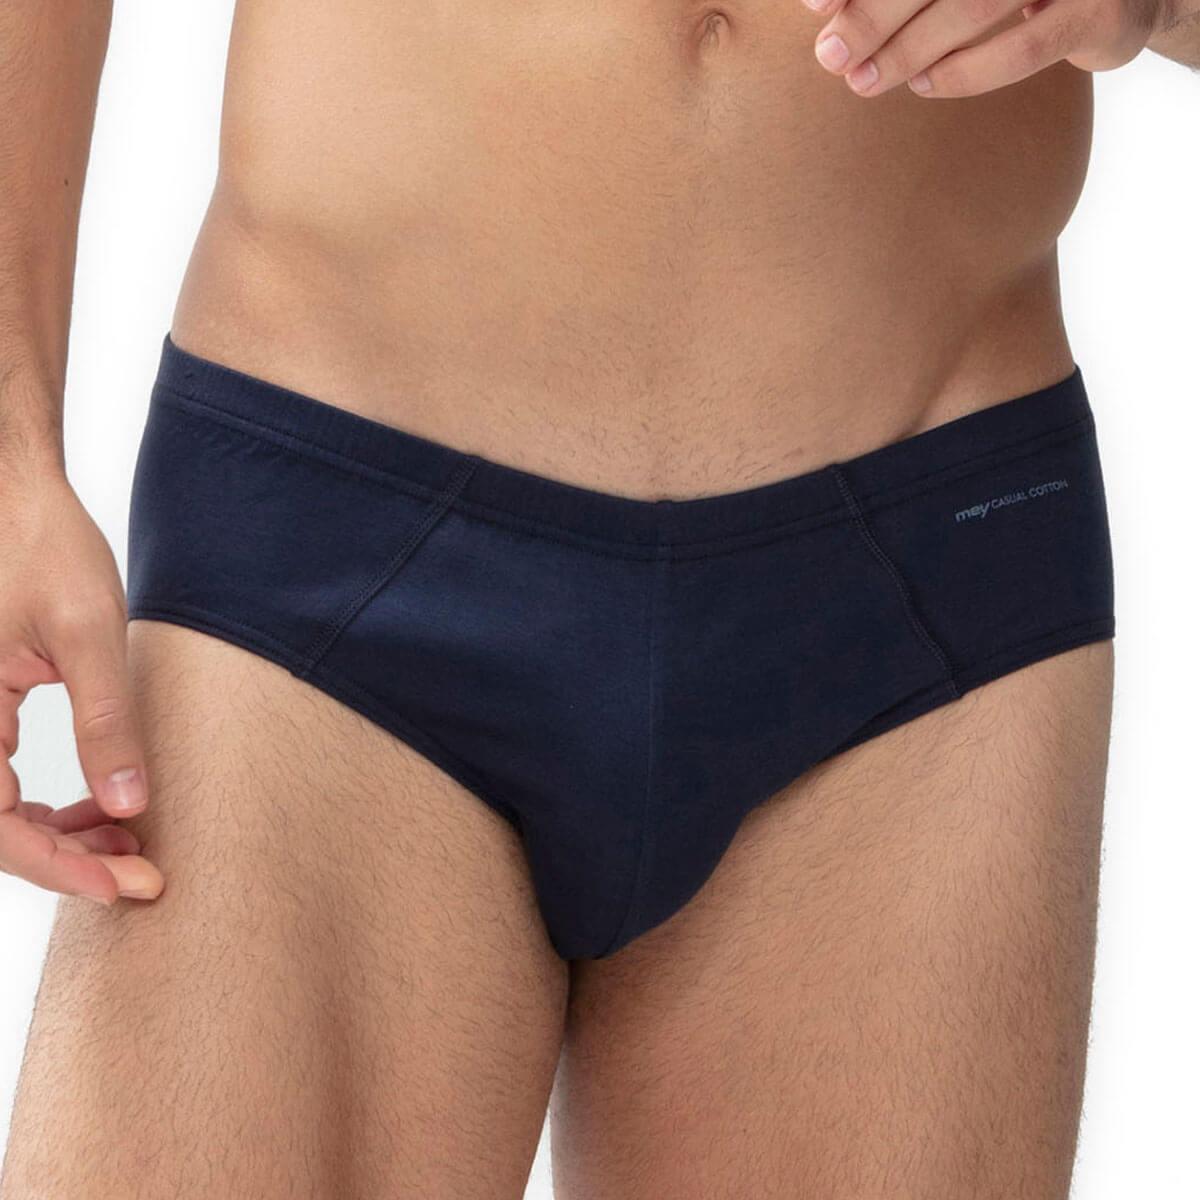 Mey underwear, For ultimate comfort and ultimate style